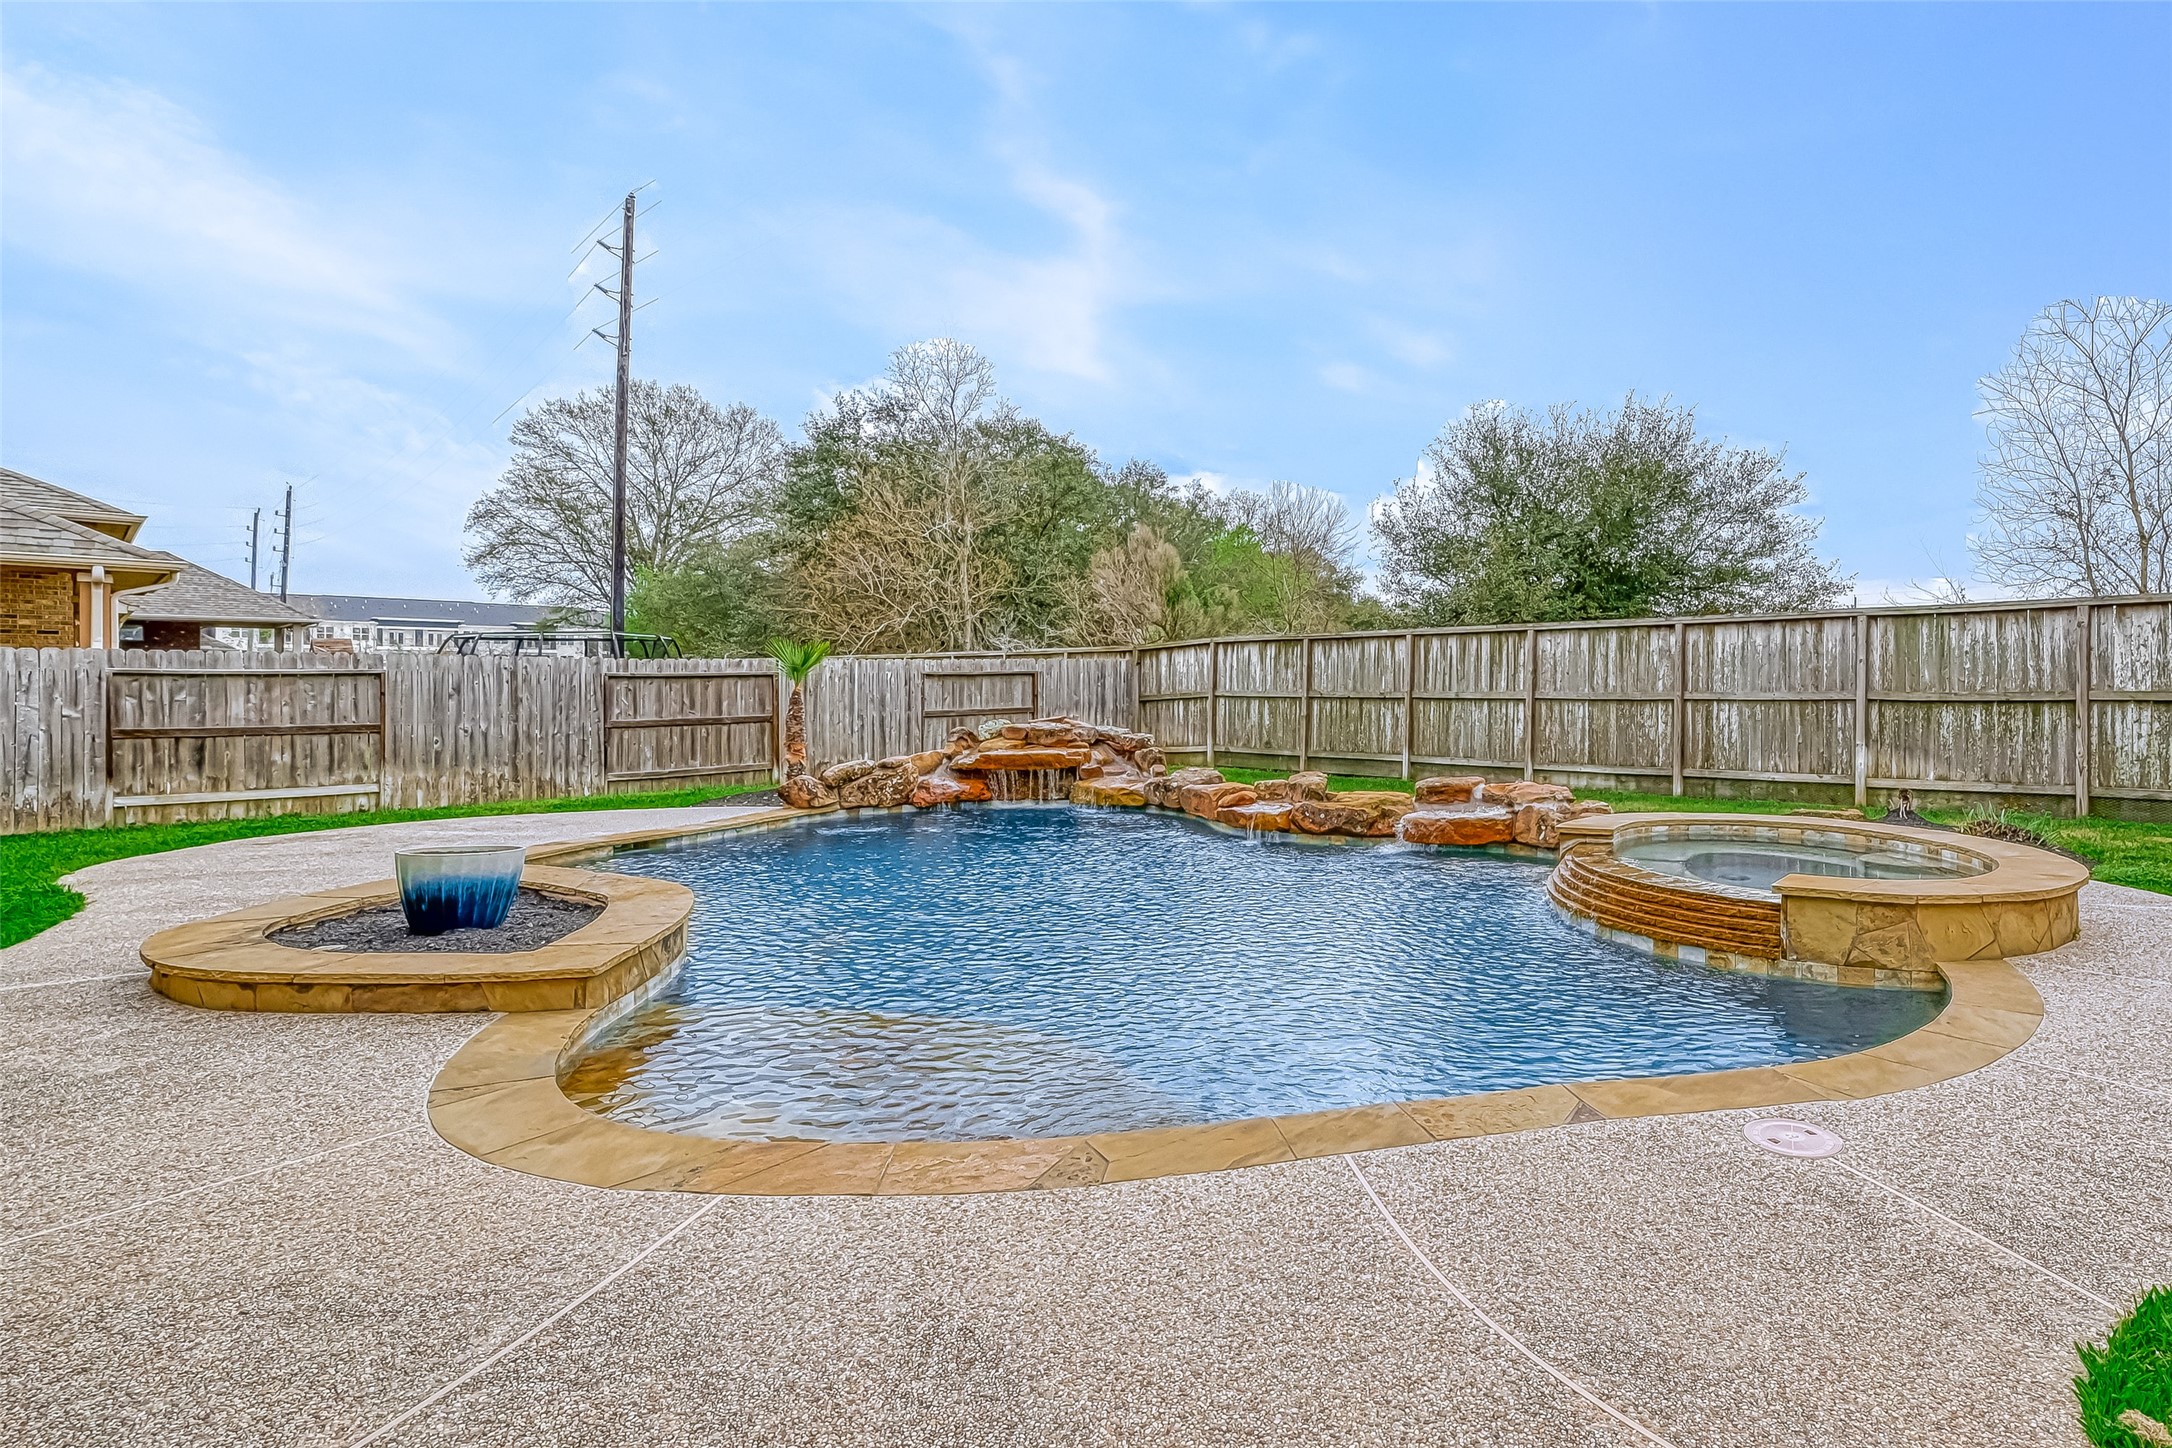 Enjoy the beautiful backyard with a pool, spa, rock water features and covered patio.